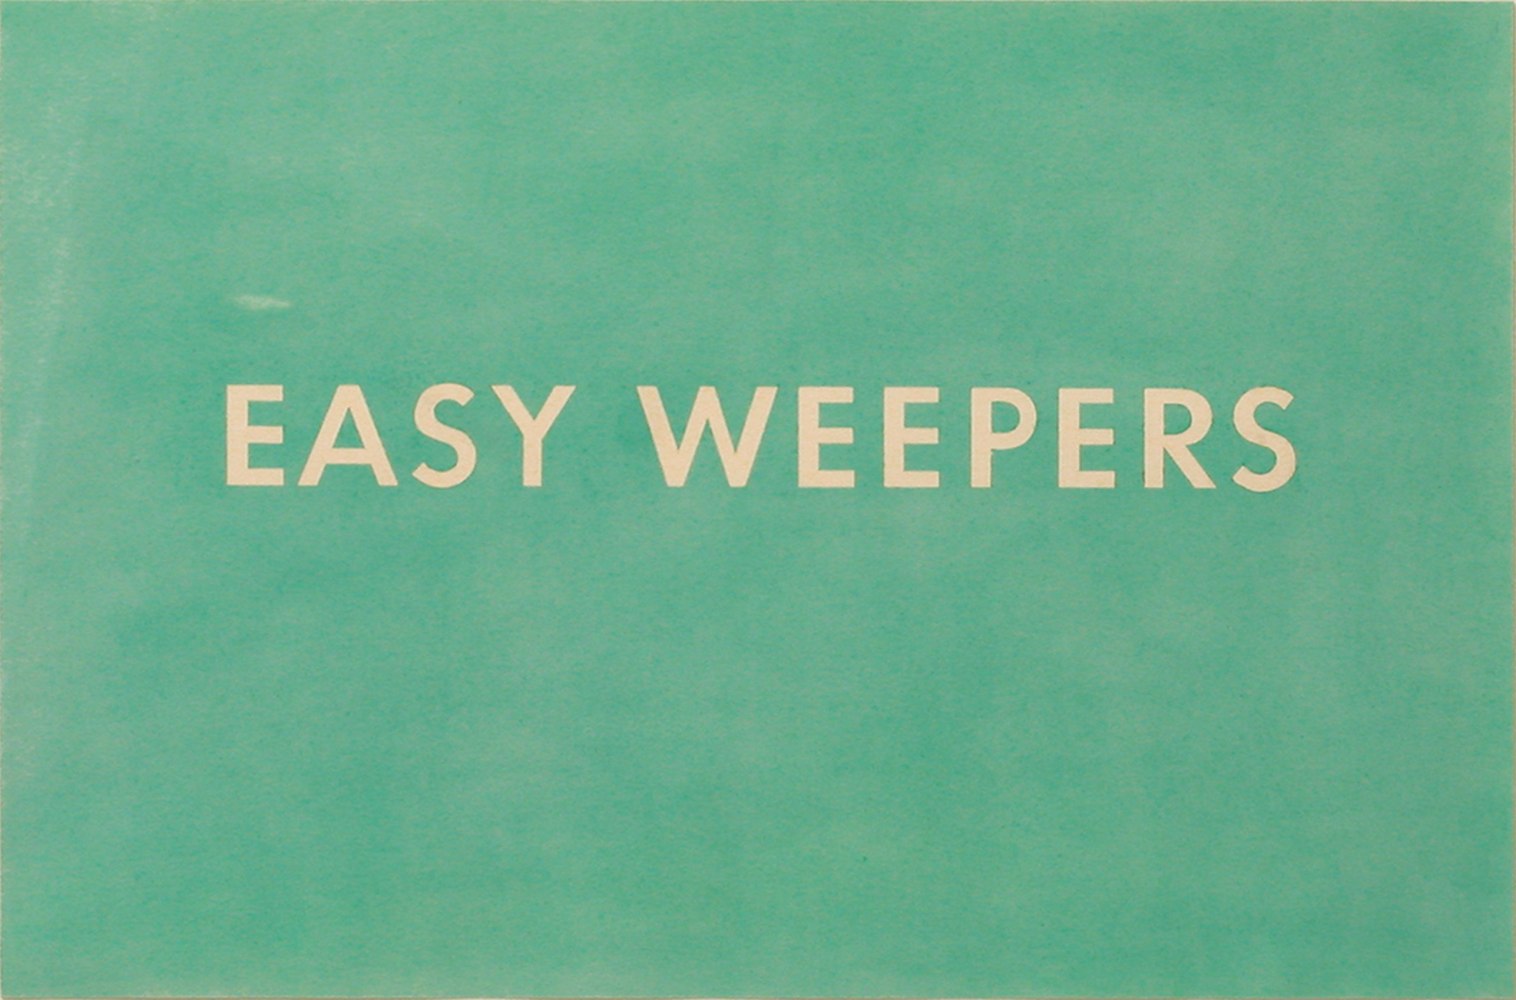 Ed Ruscha

Easy Weepers, 1975

dried pigment on paper

14 x 21 inches; 35.6 x 53.3 centimeters